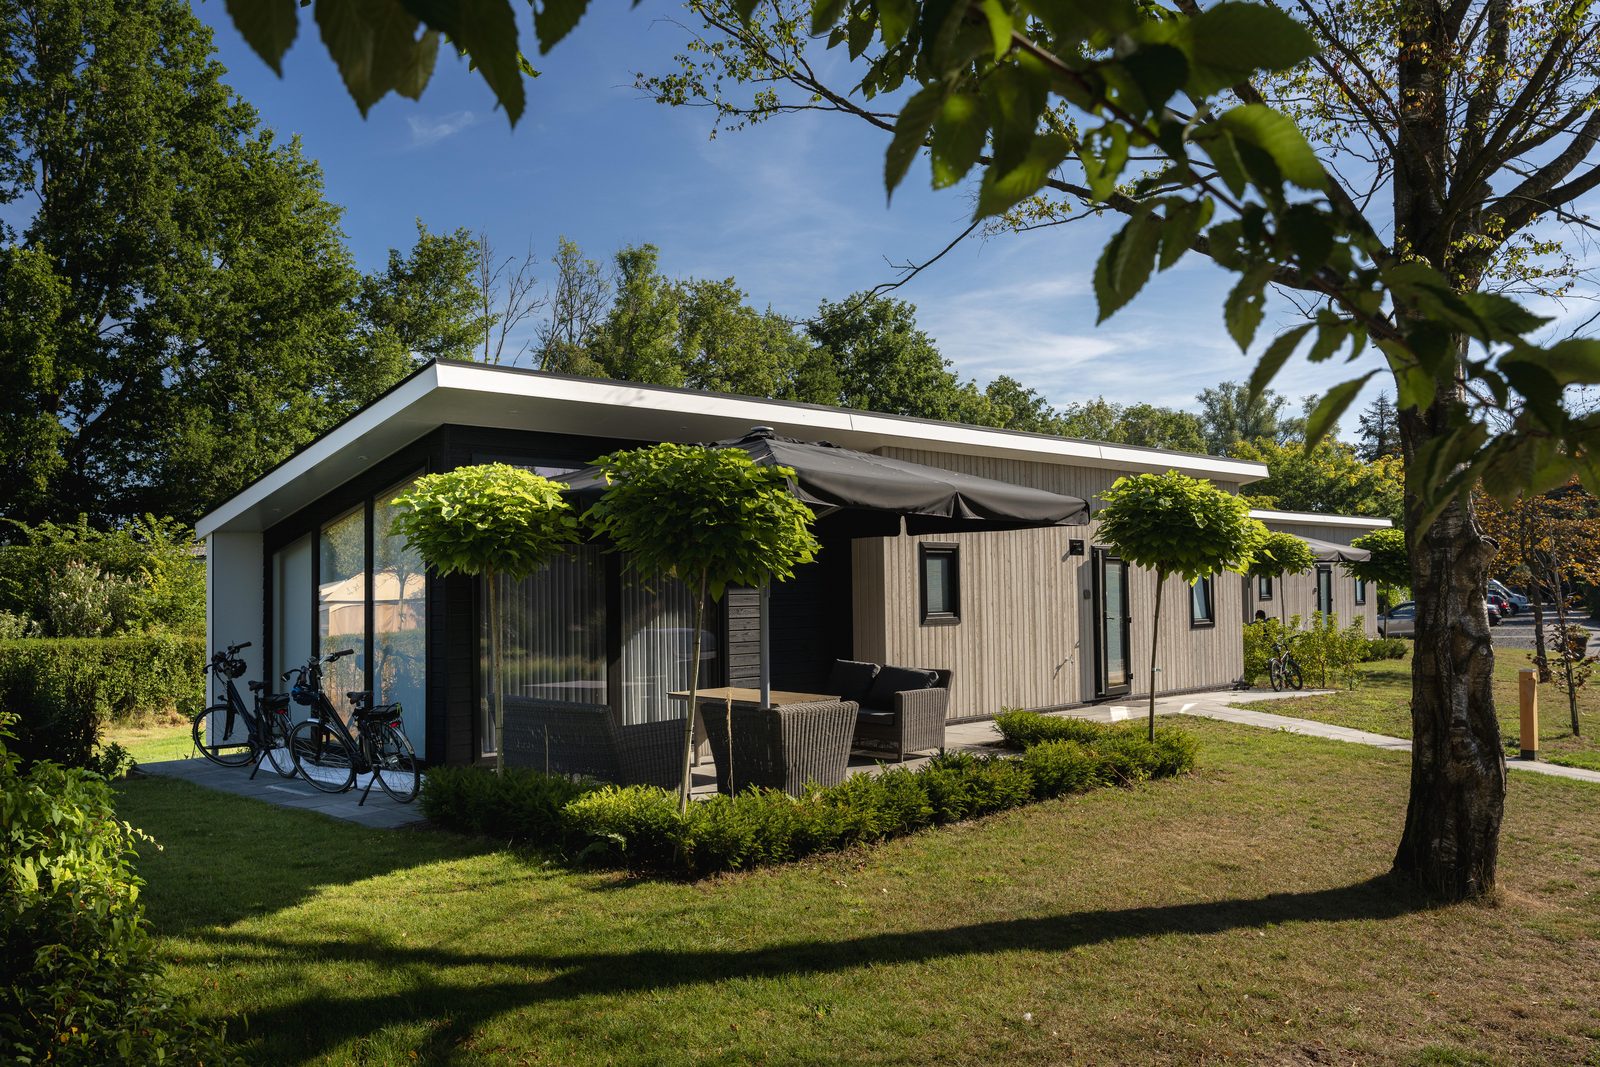 Check out our nature house in Twente